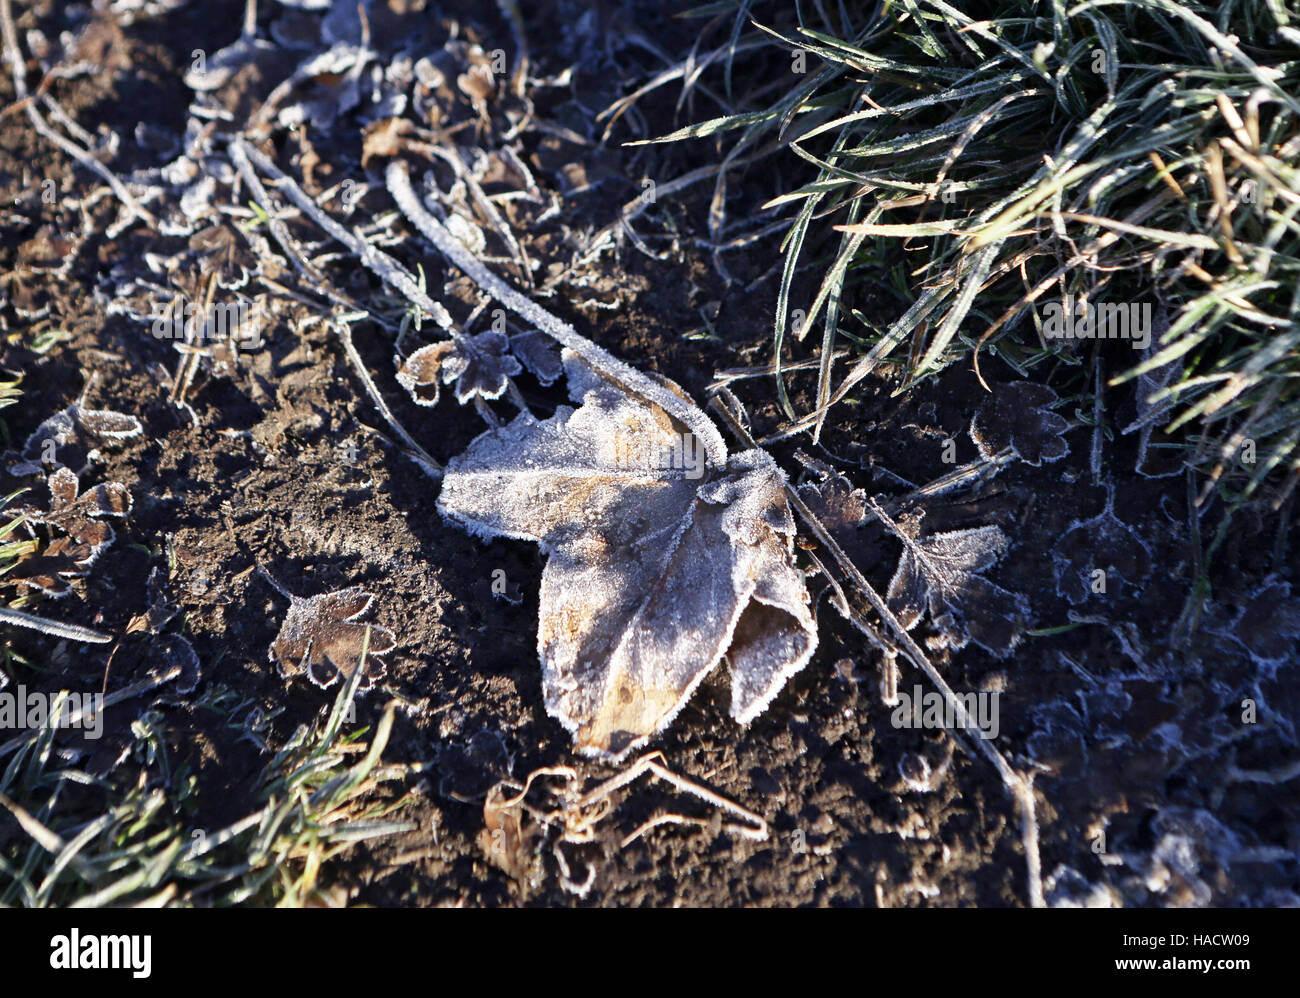 Frost covers leaf on a field near Kingsclere, Hampshire, after one of England's coldest nights of the autumn so far this year. Stock Photo